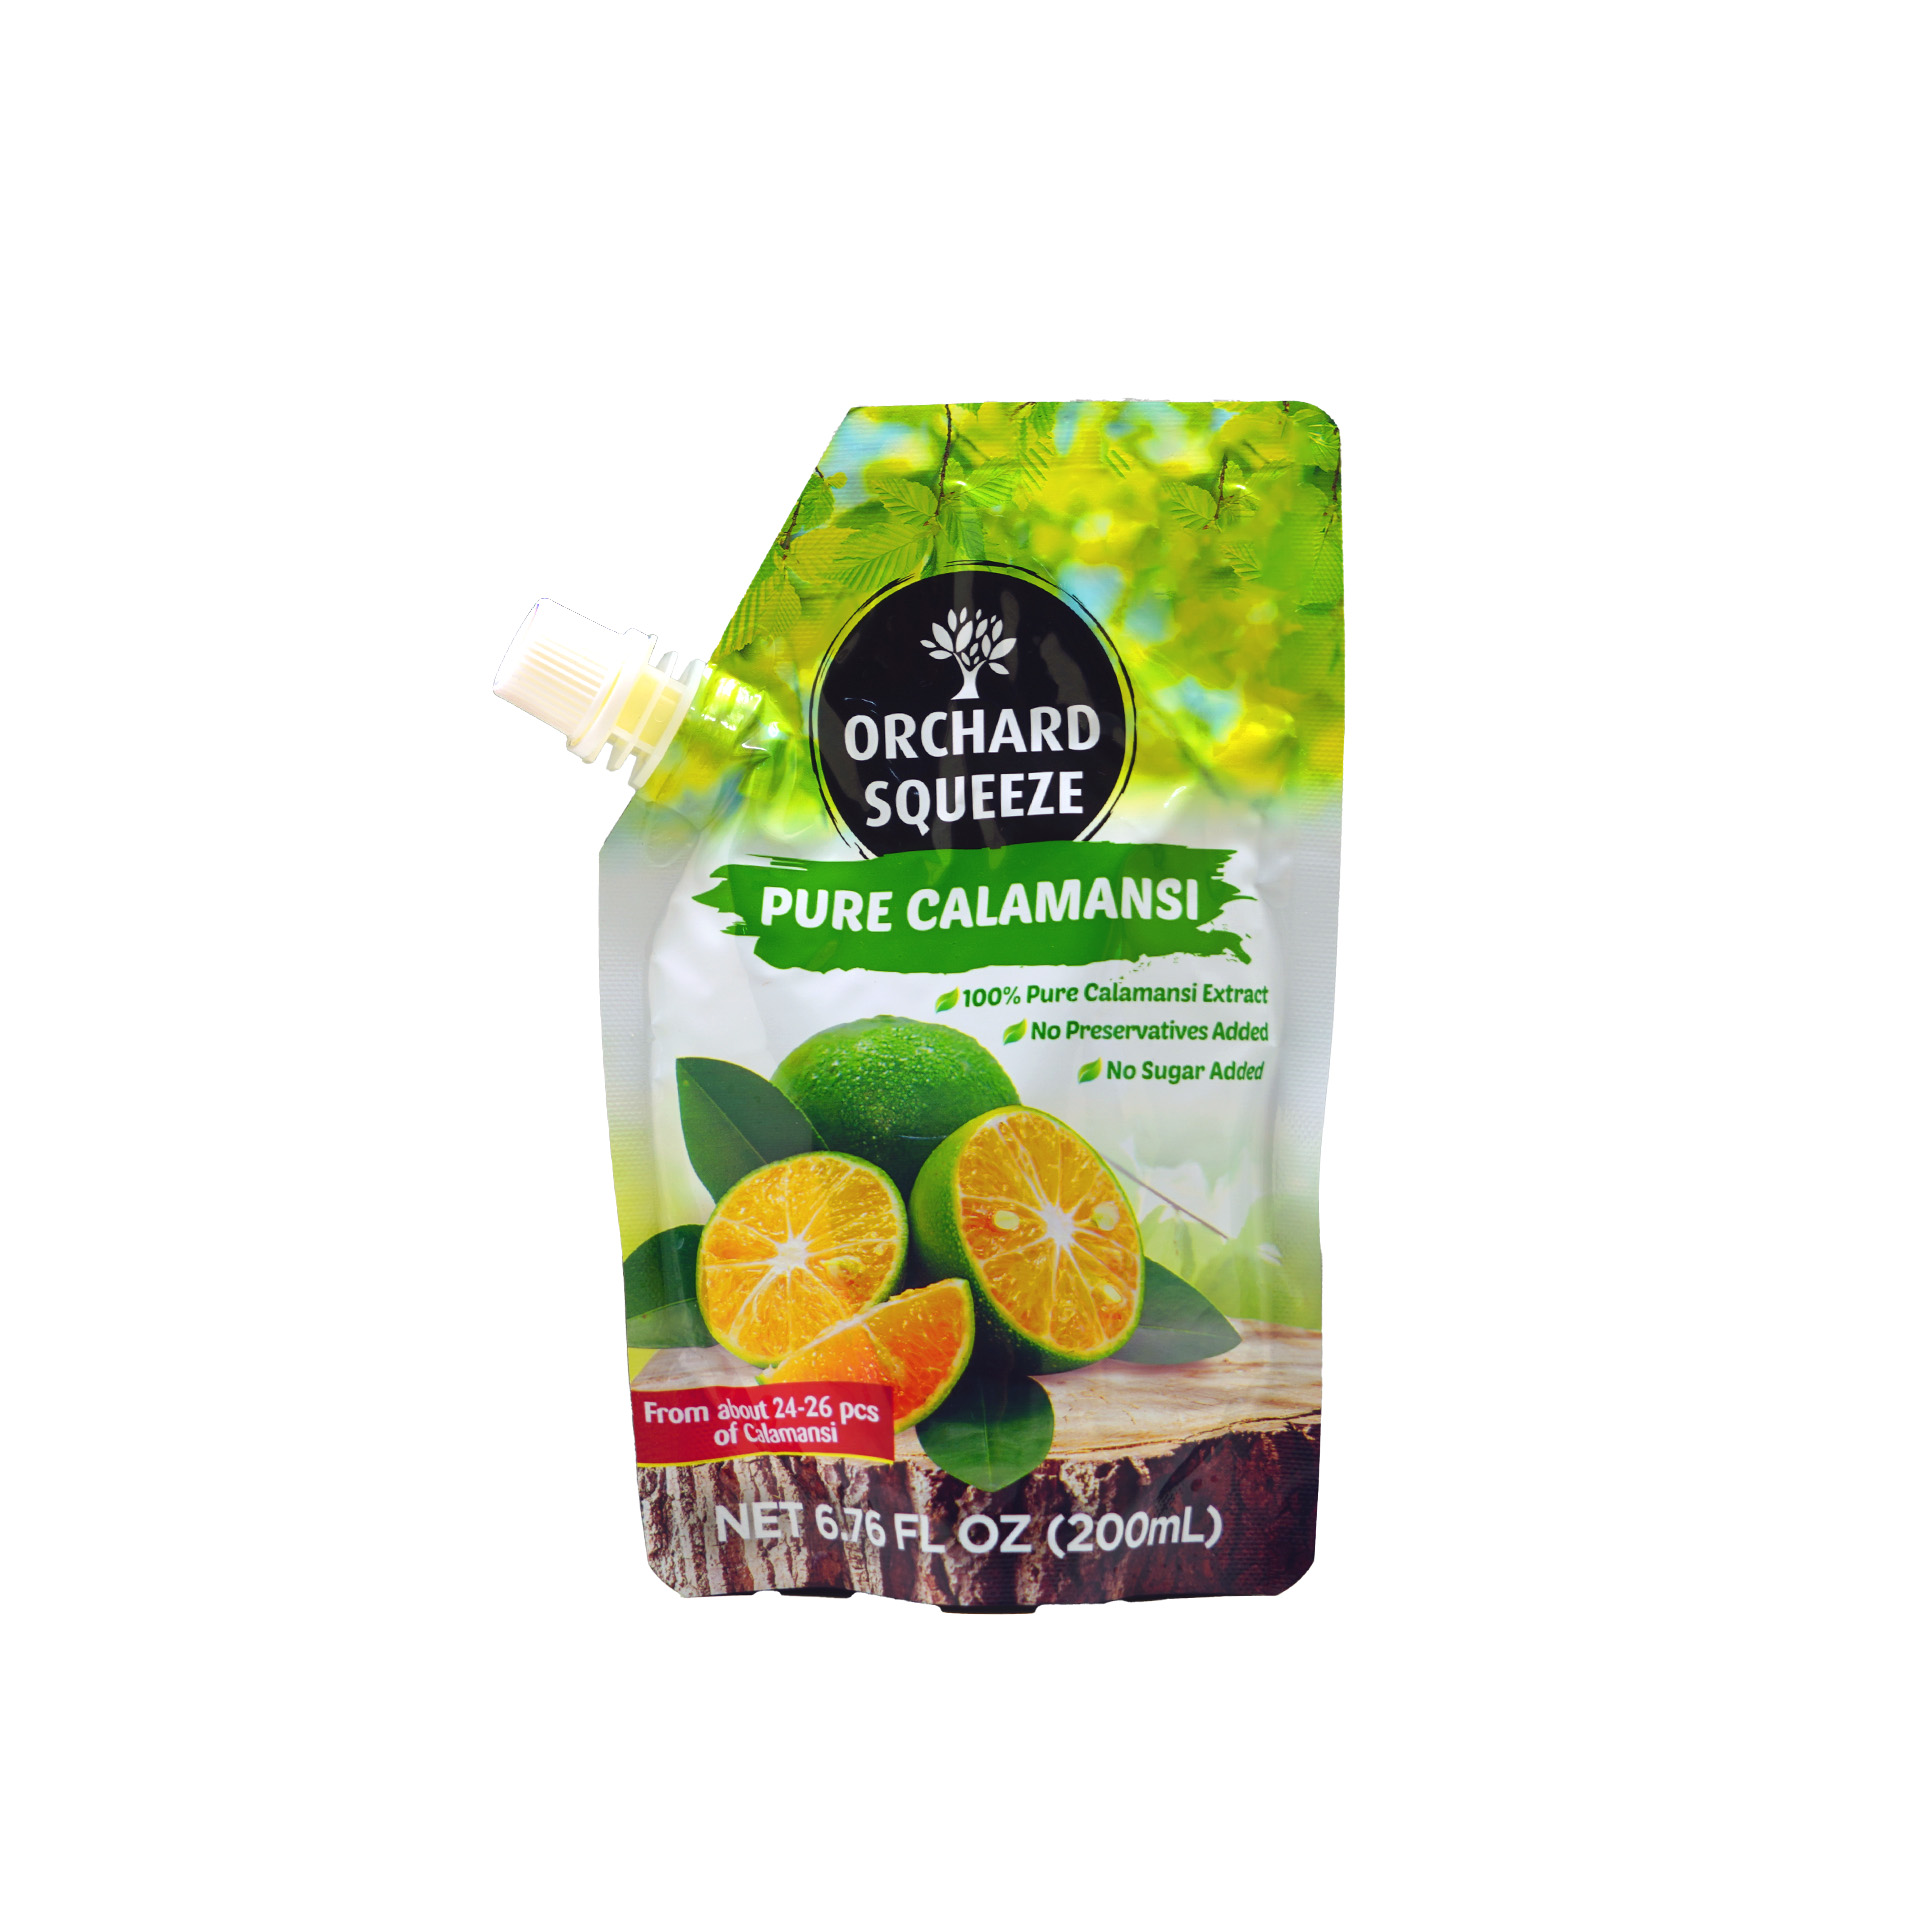 Orchard Squeeze Pure Calamansi (200ml)